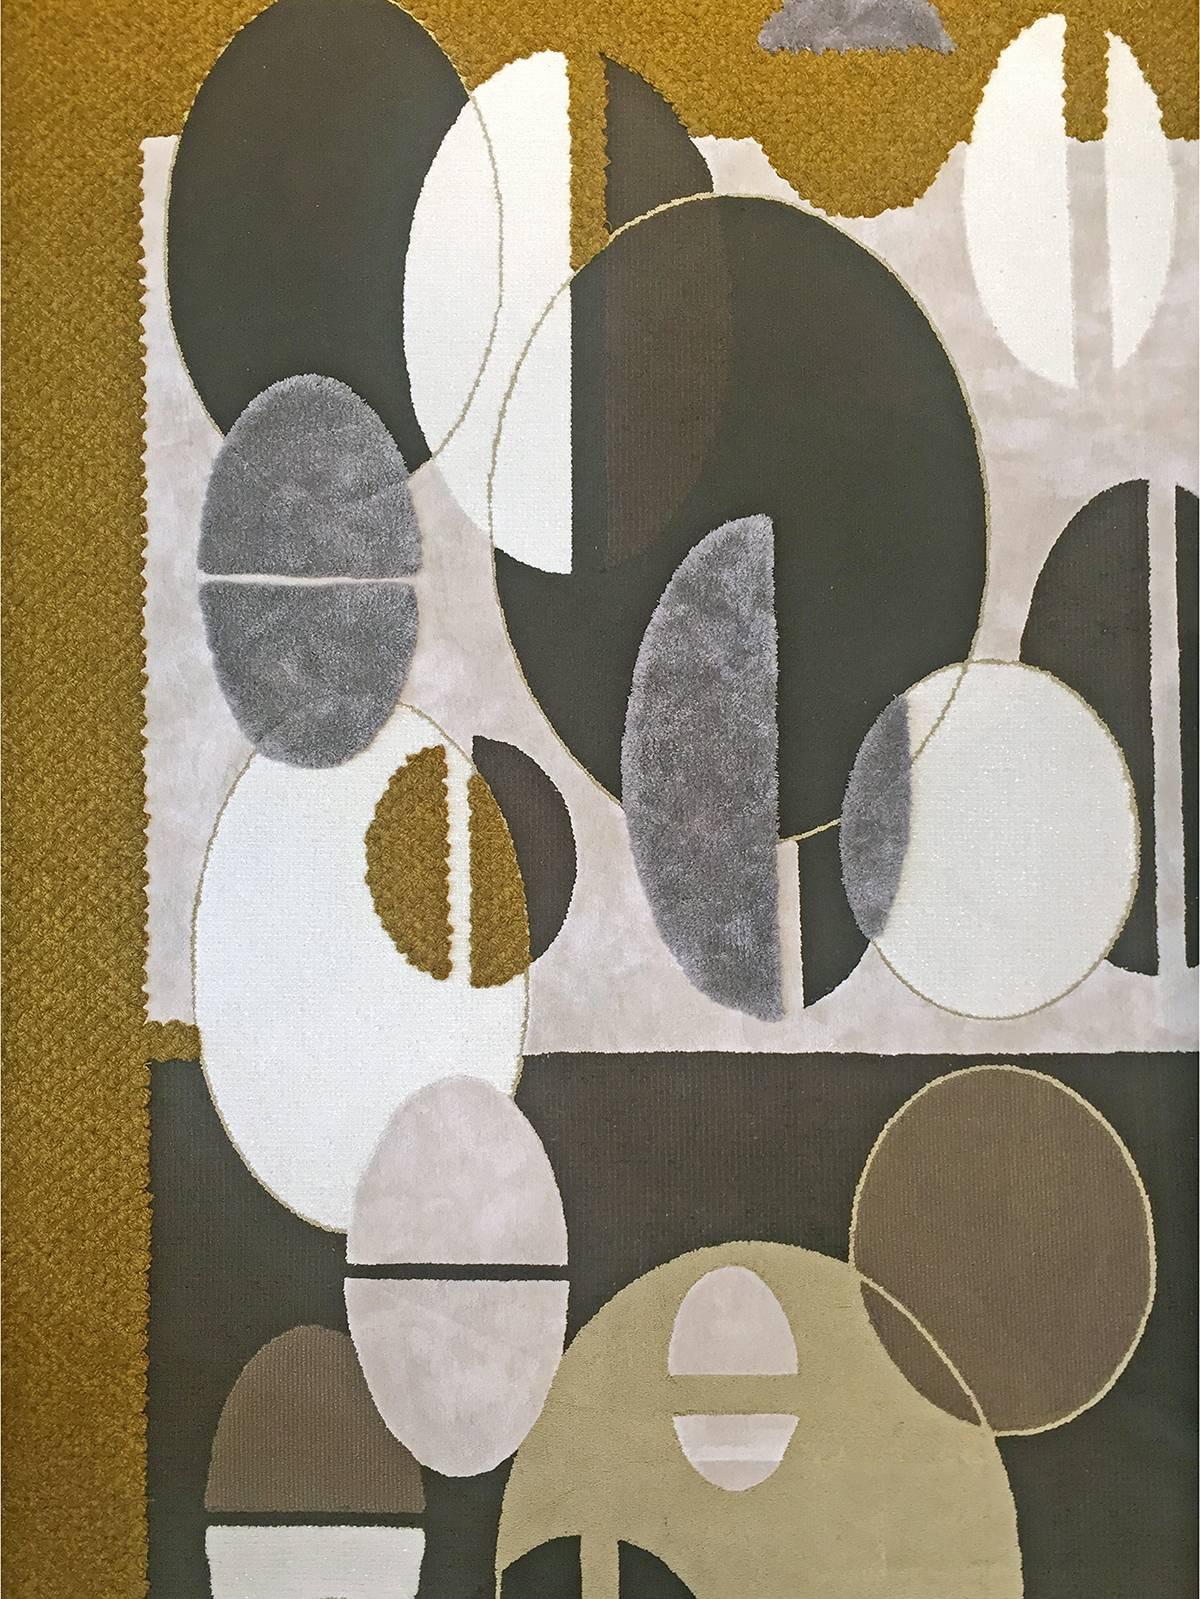 Hand tufted tactile rug, featuring circular shapes, layering of textures and bold colours inspired by our antiques collection. Only the finest quality silks, wool, lurex and silver yarns have also been used to produce these rugs, which are highly